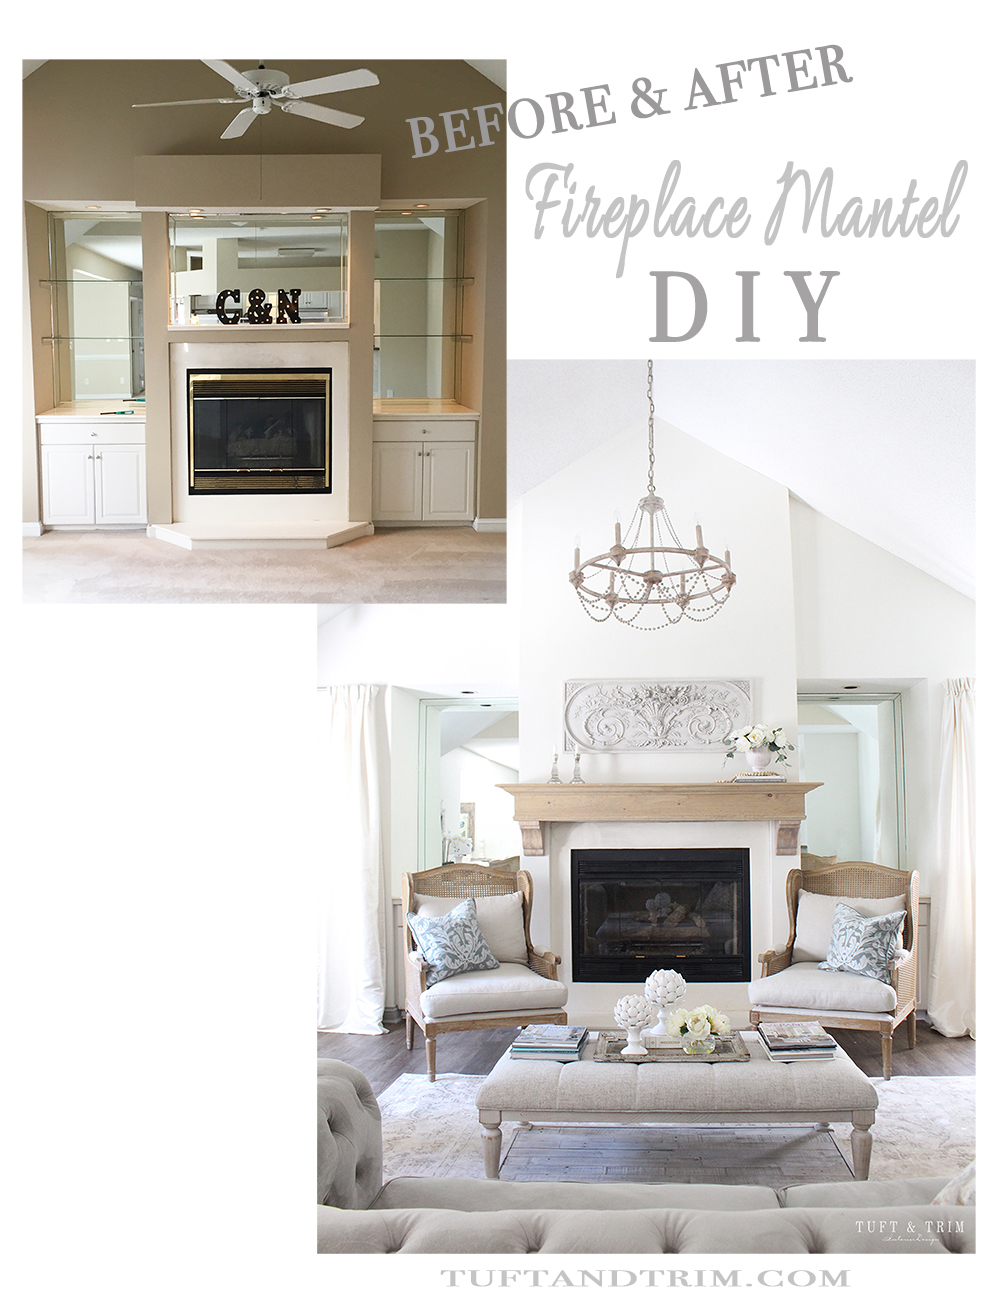 Before and After: Fireplace Mantel DIY. Step by Step Transformation at tuftandtrim.com